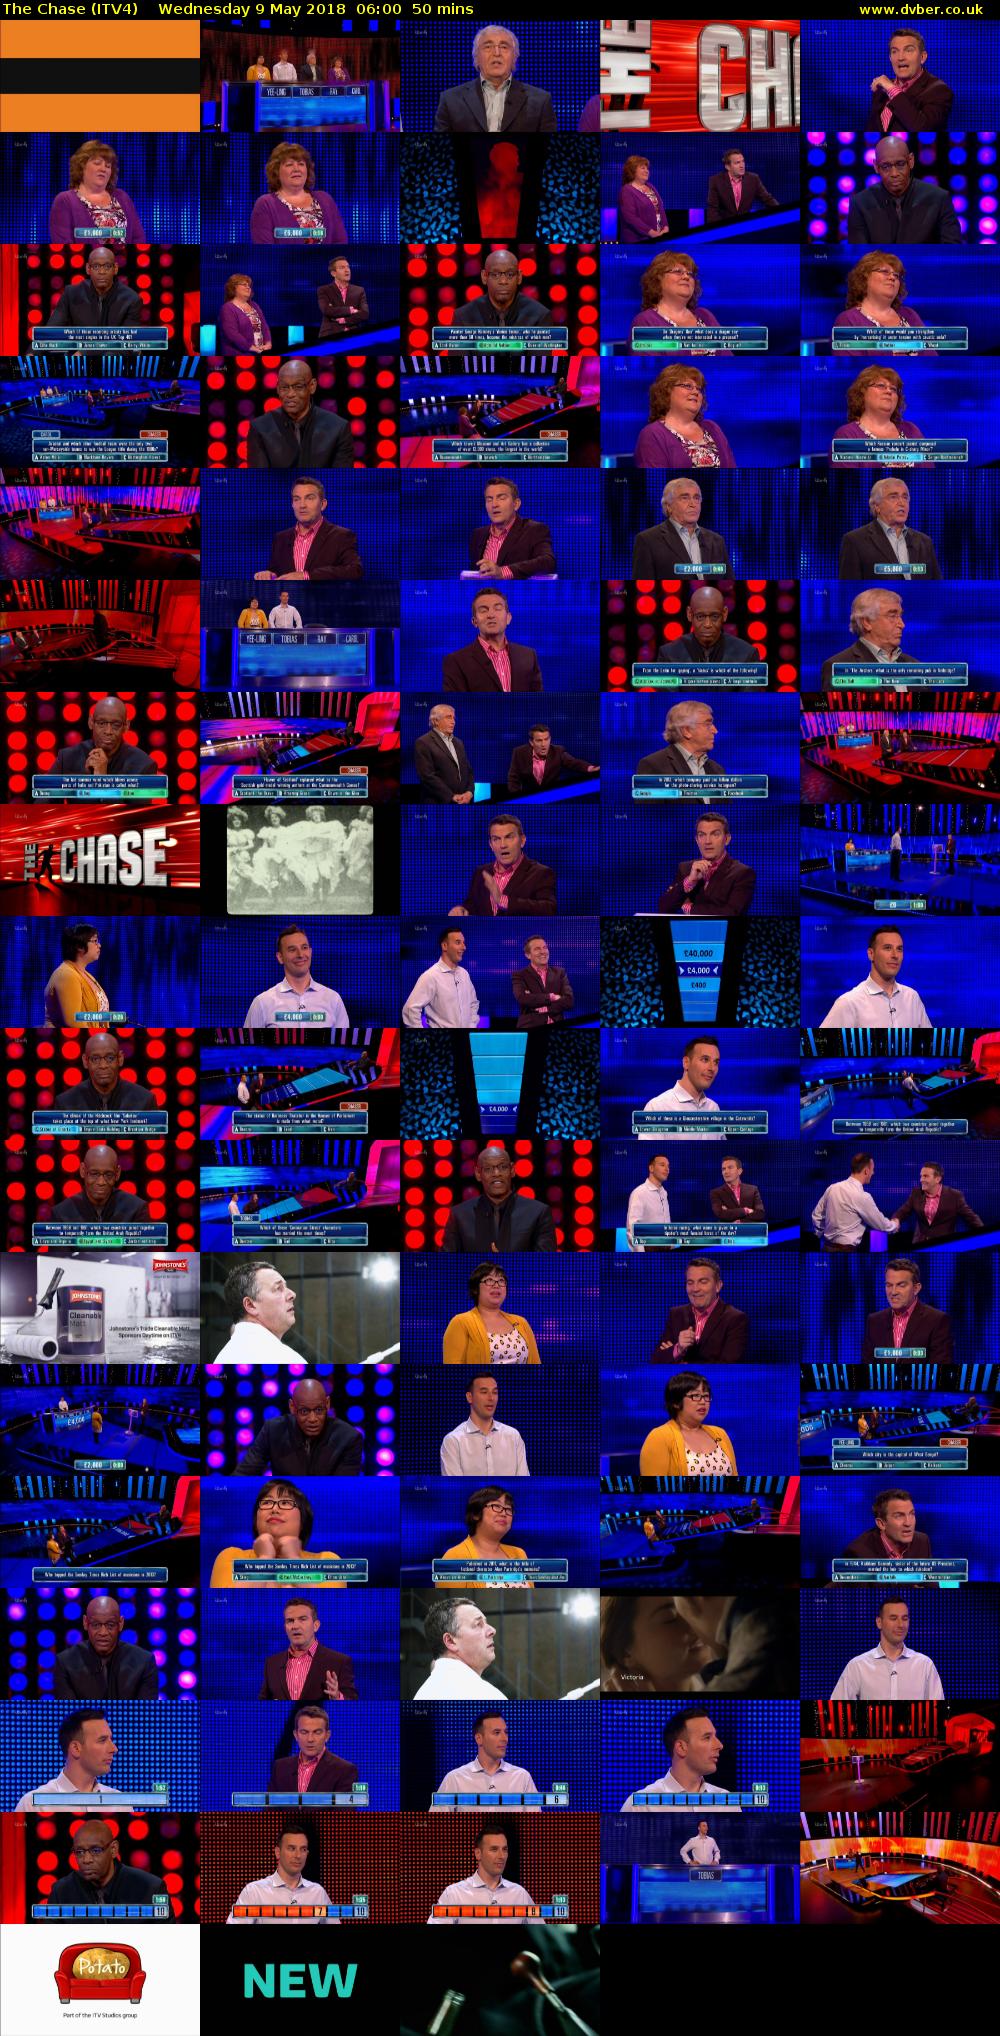 The Chase (ITV4) Wednesday 9 May 2018 06:00 - 06:50